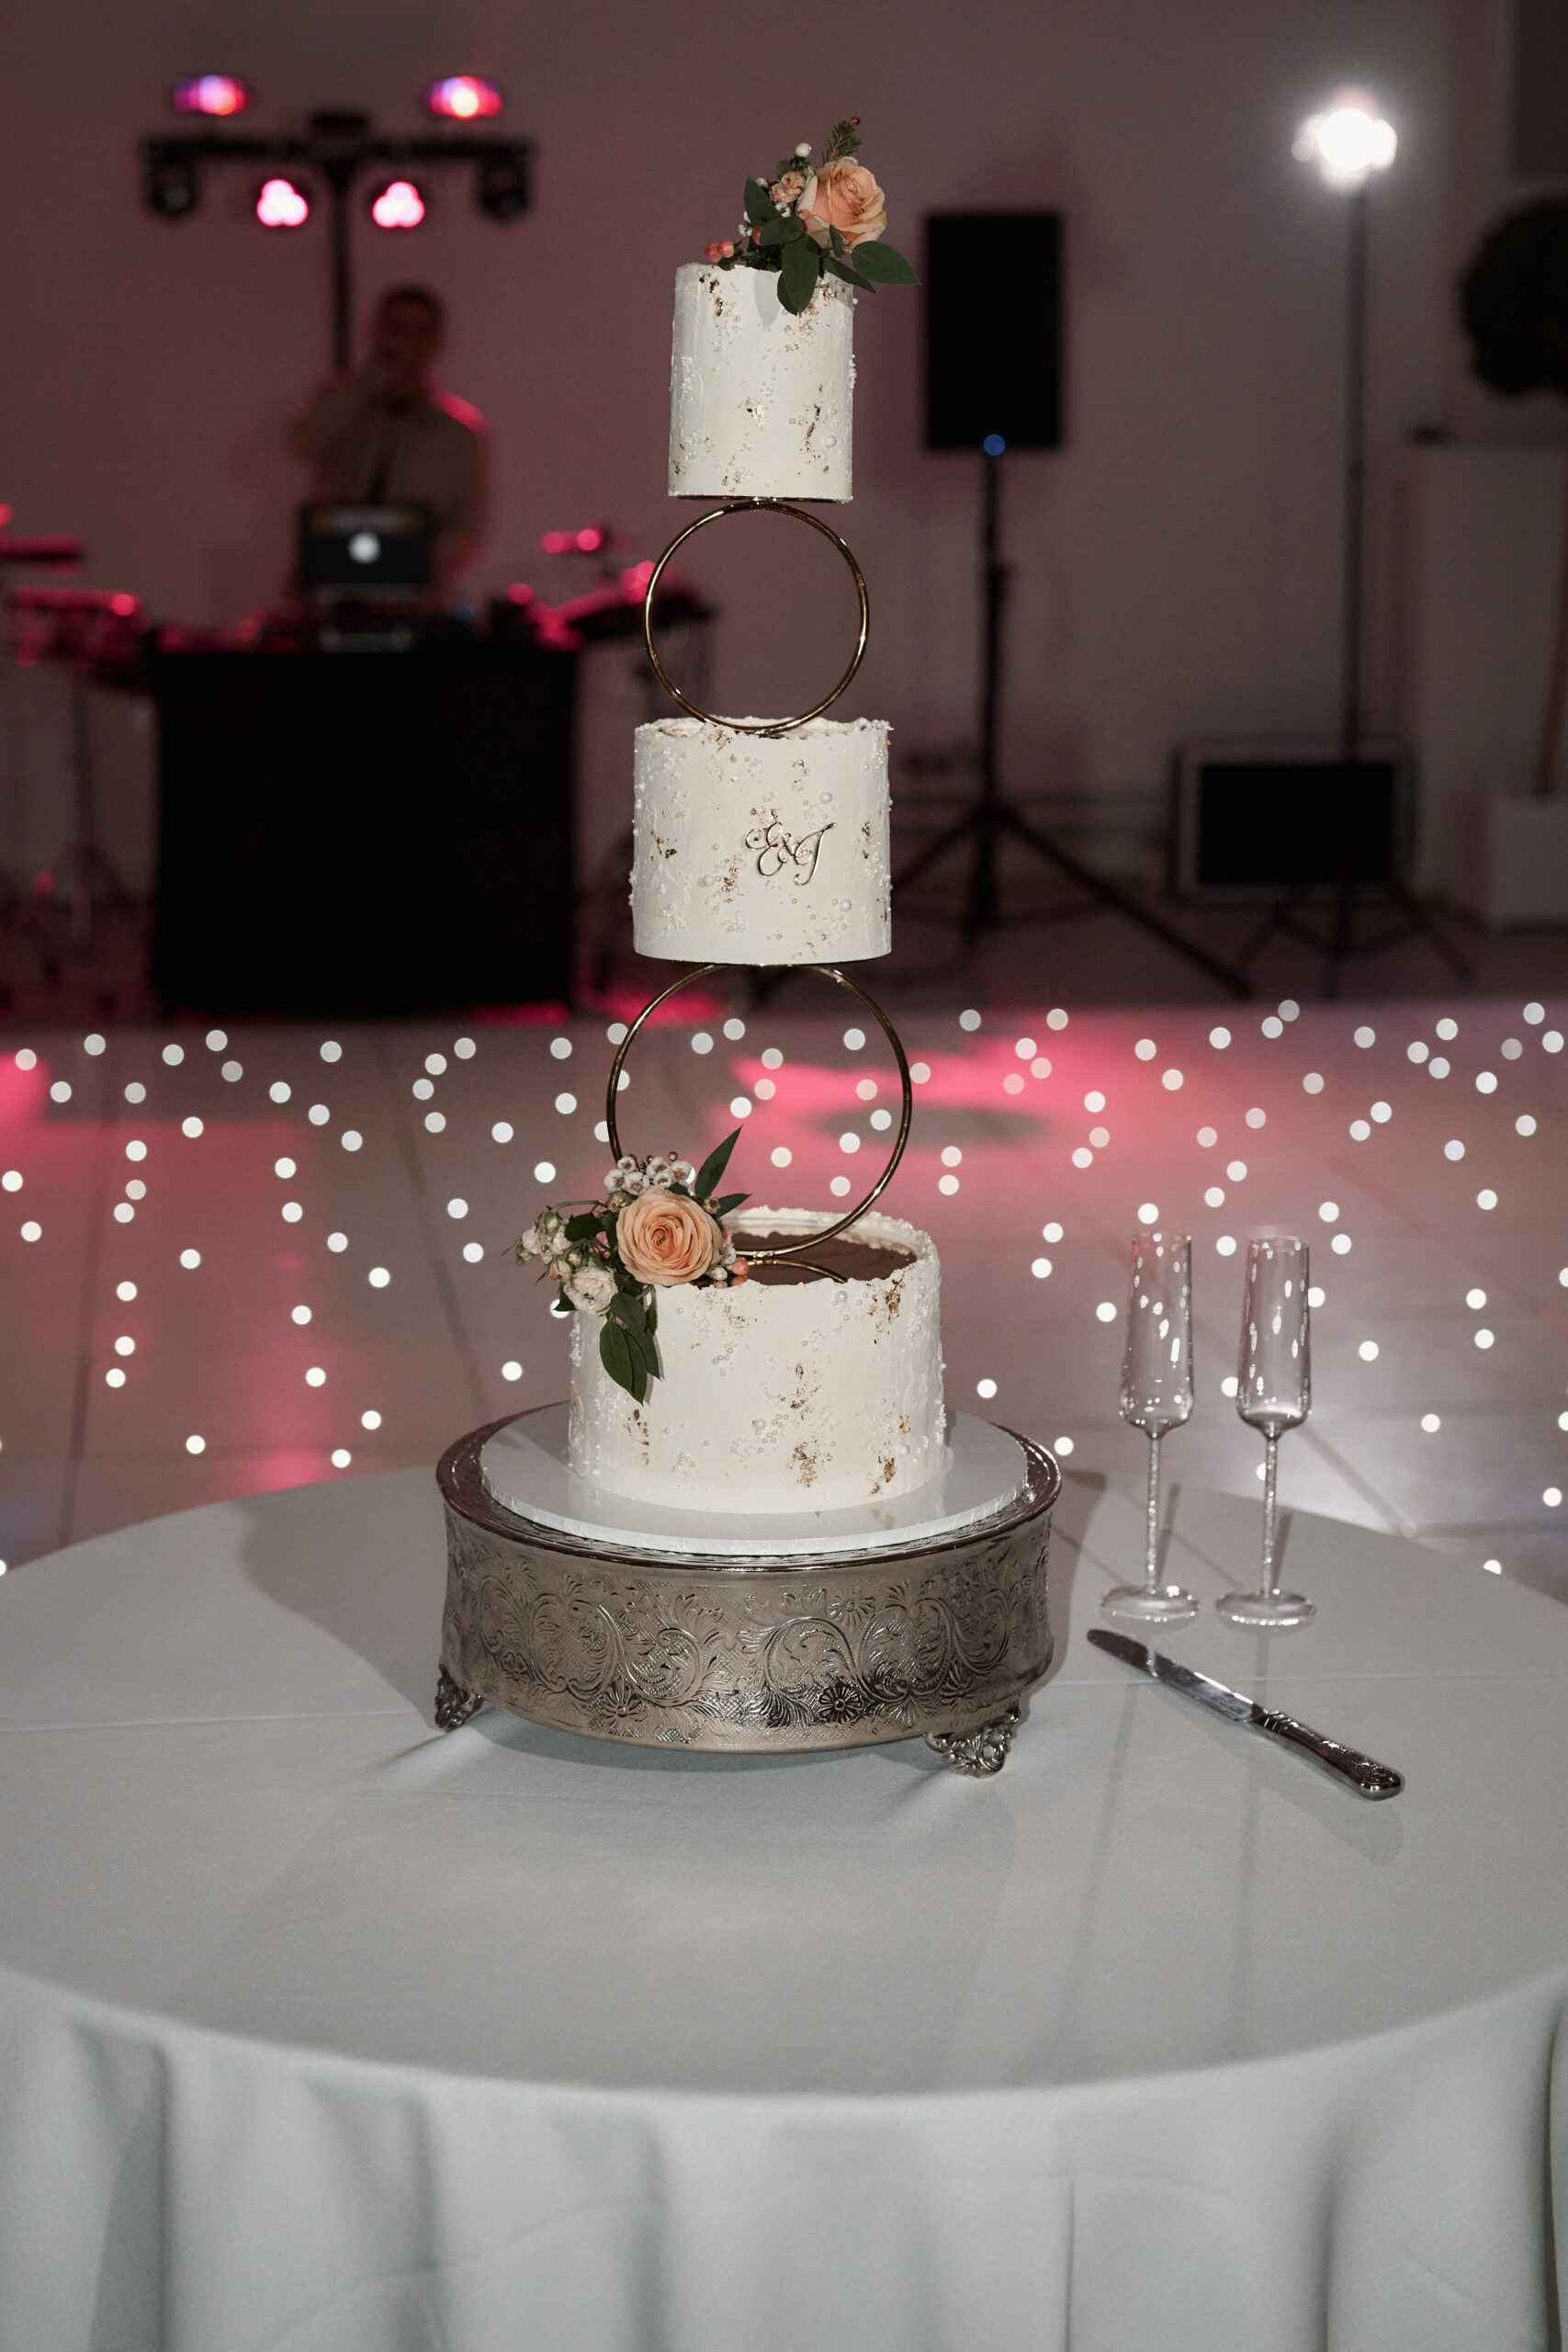 A three-layer wedding cake is sitting on a table.